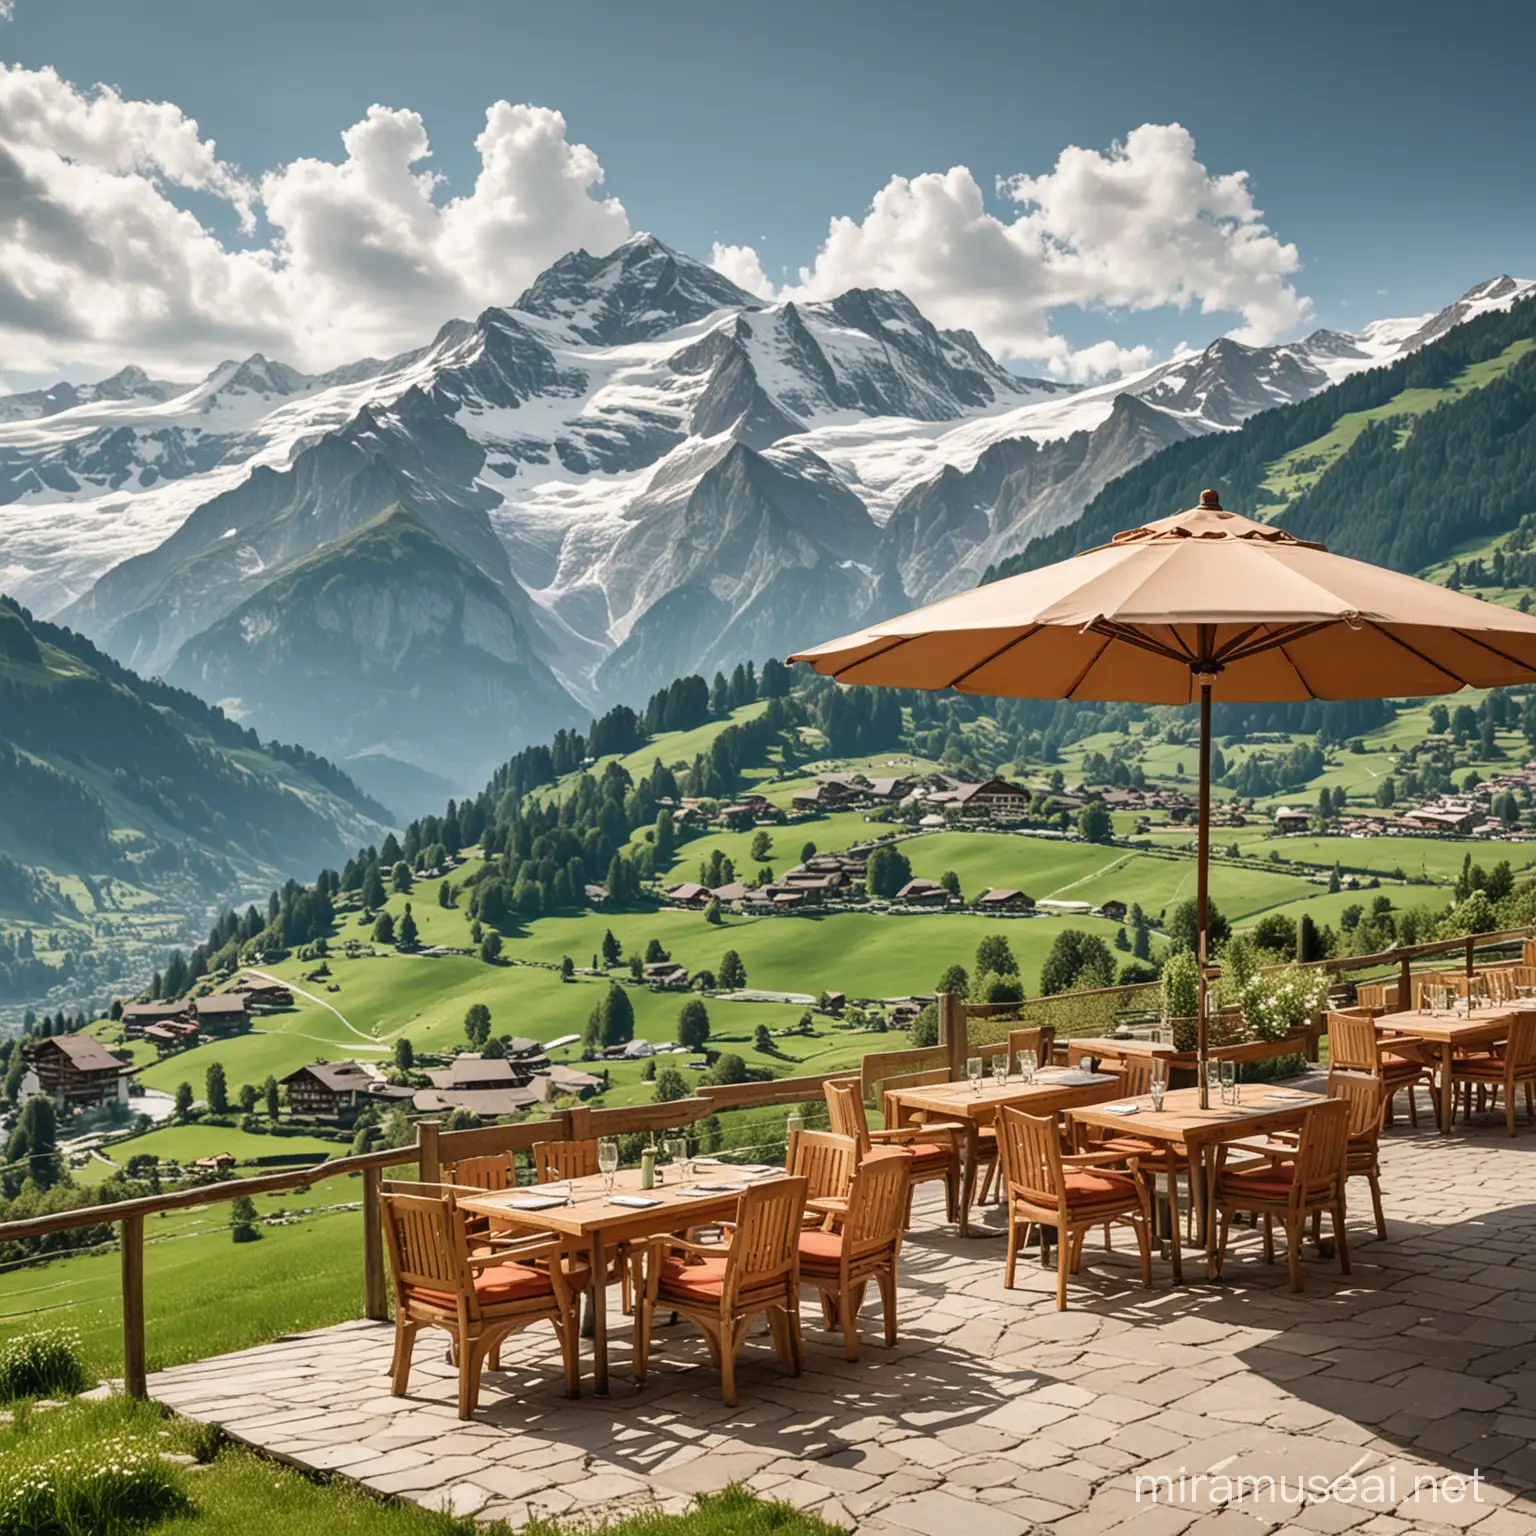 Scenic Swiss Mountain Landscape with SnowCapped Peaks and Mountain Restaurant